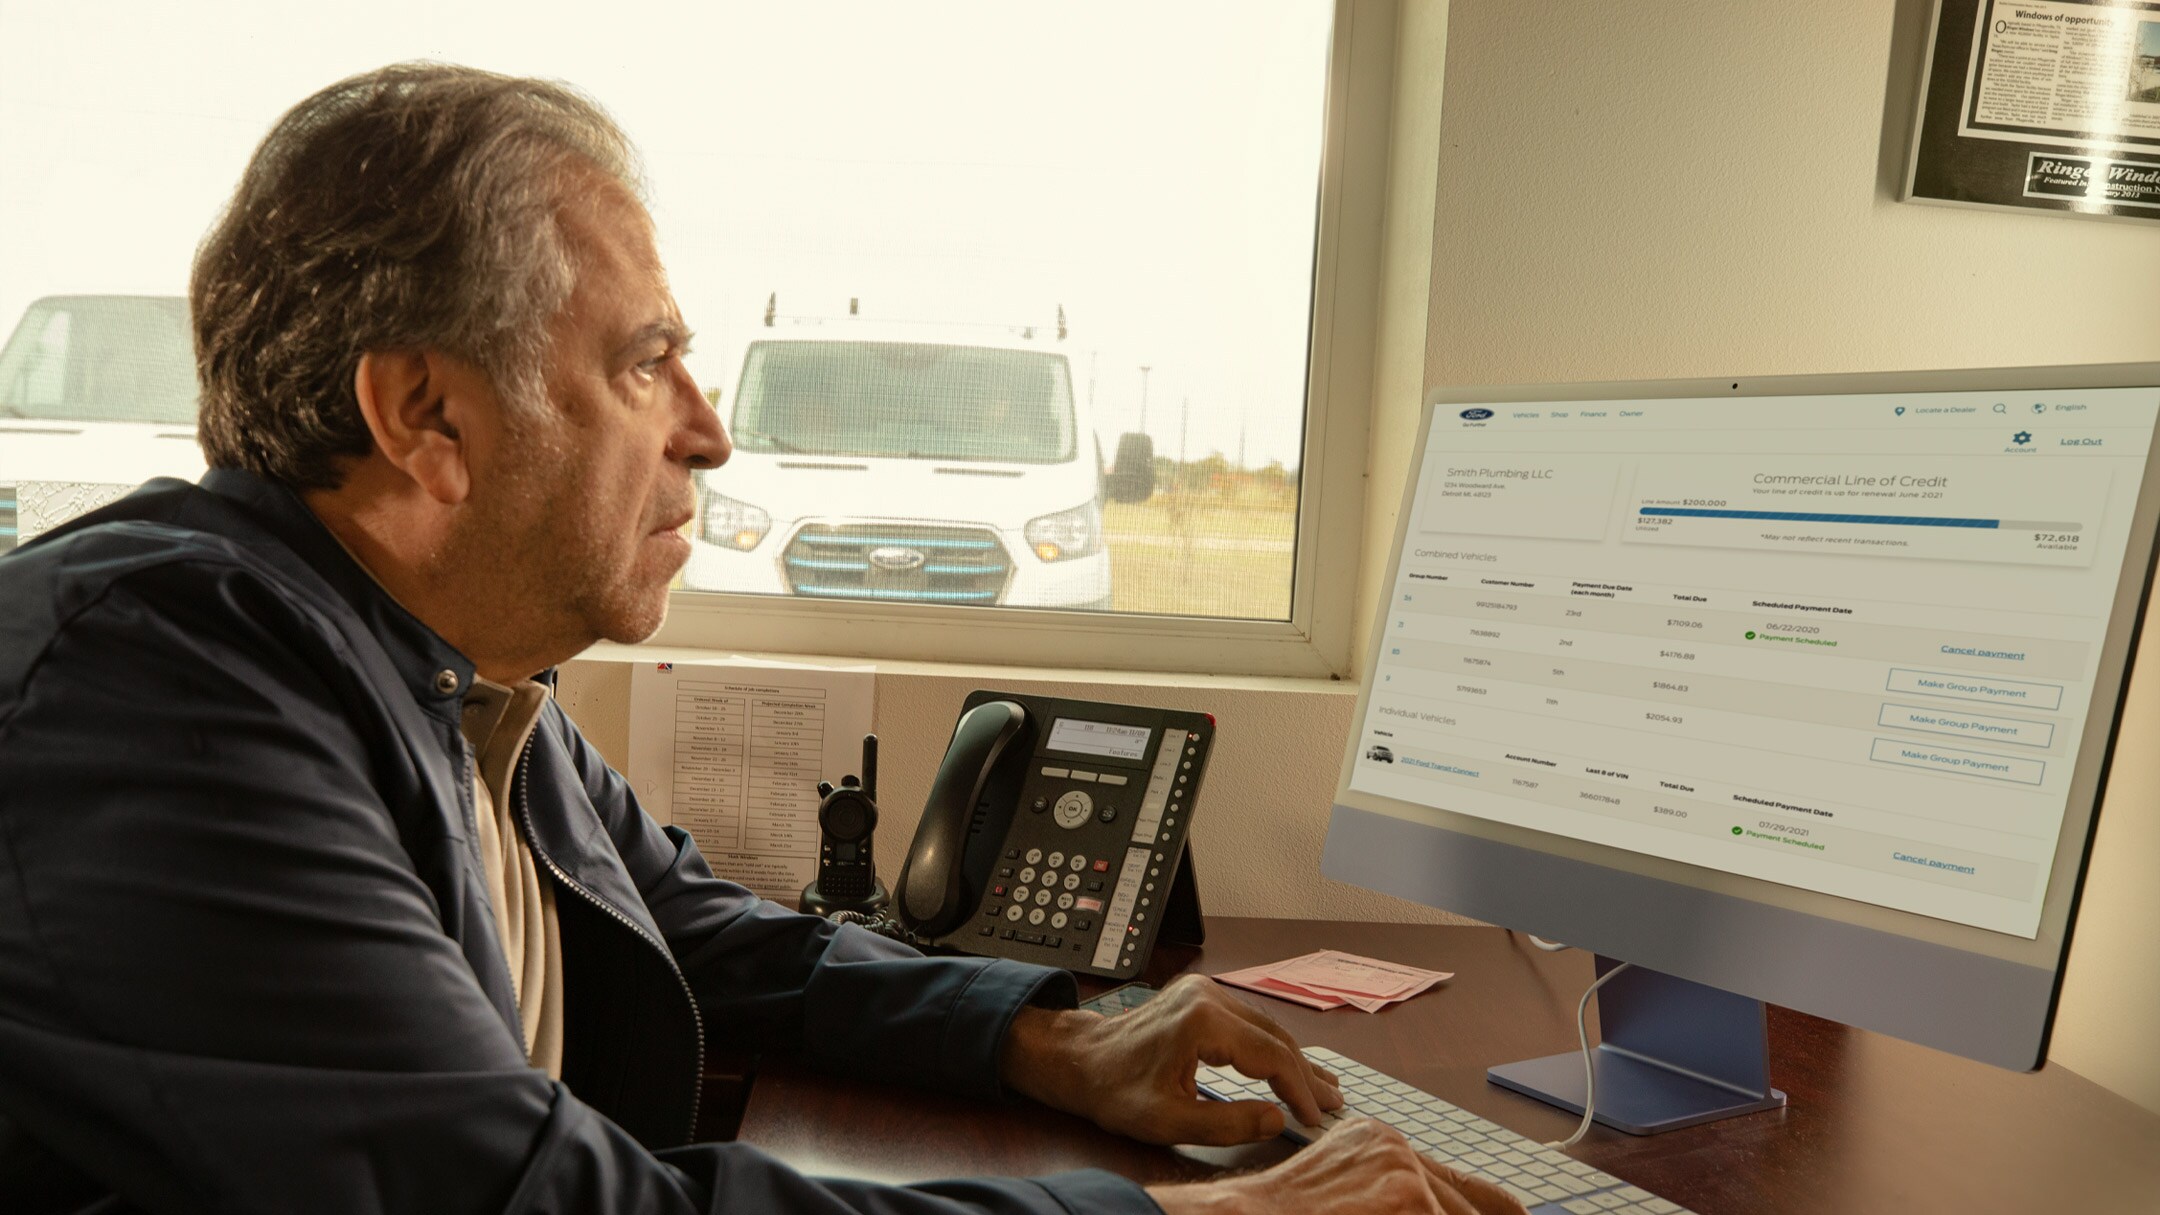 Person checking Fleet management on computer